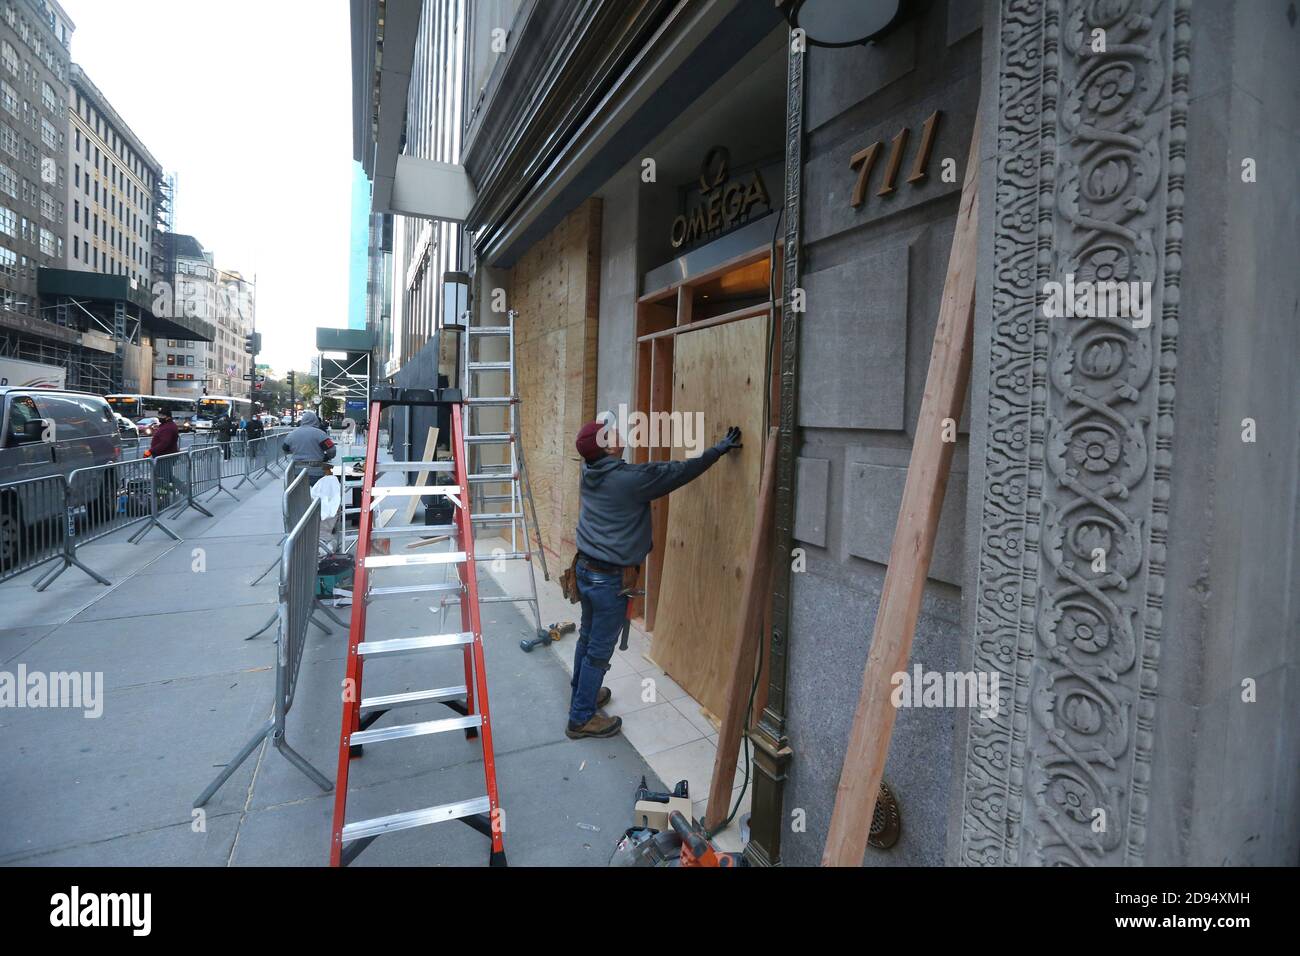 New York, NY, USA. 2nd Nov, 2020. Nov 2, 2020 : New York Stores prepare for possible unrest surrounding election day. The Omega Store on 5th Avenue boarded up to prevent looting and vandalism on election day. Credit: Dan Herrick/ZUMA Wire/Alamy Live News Stock Photo